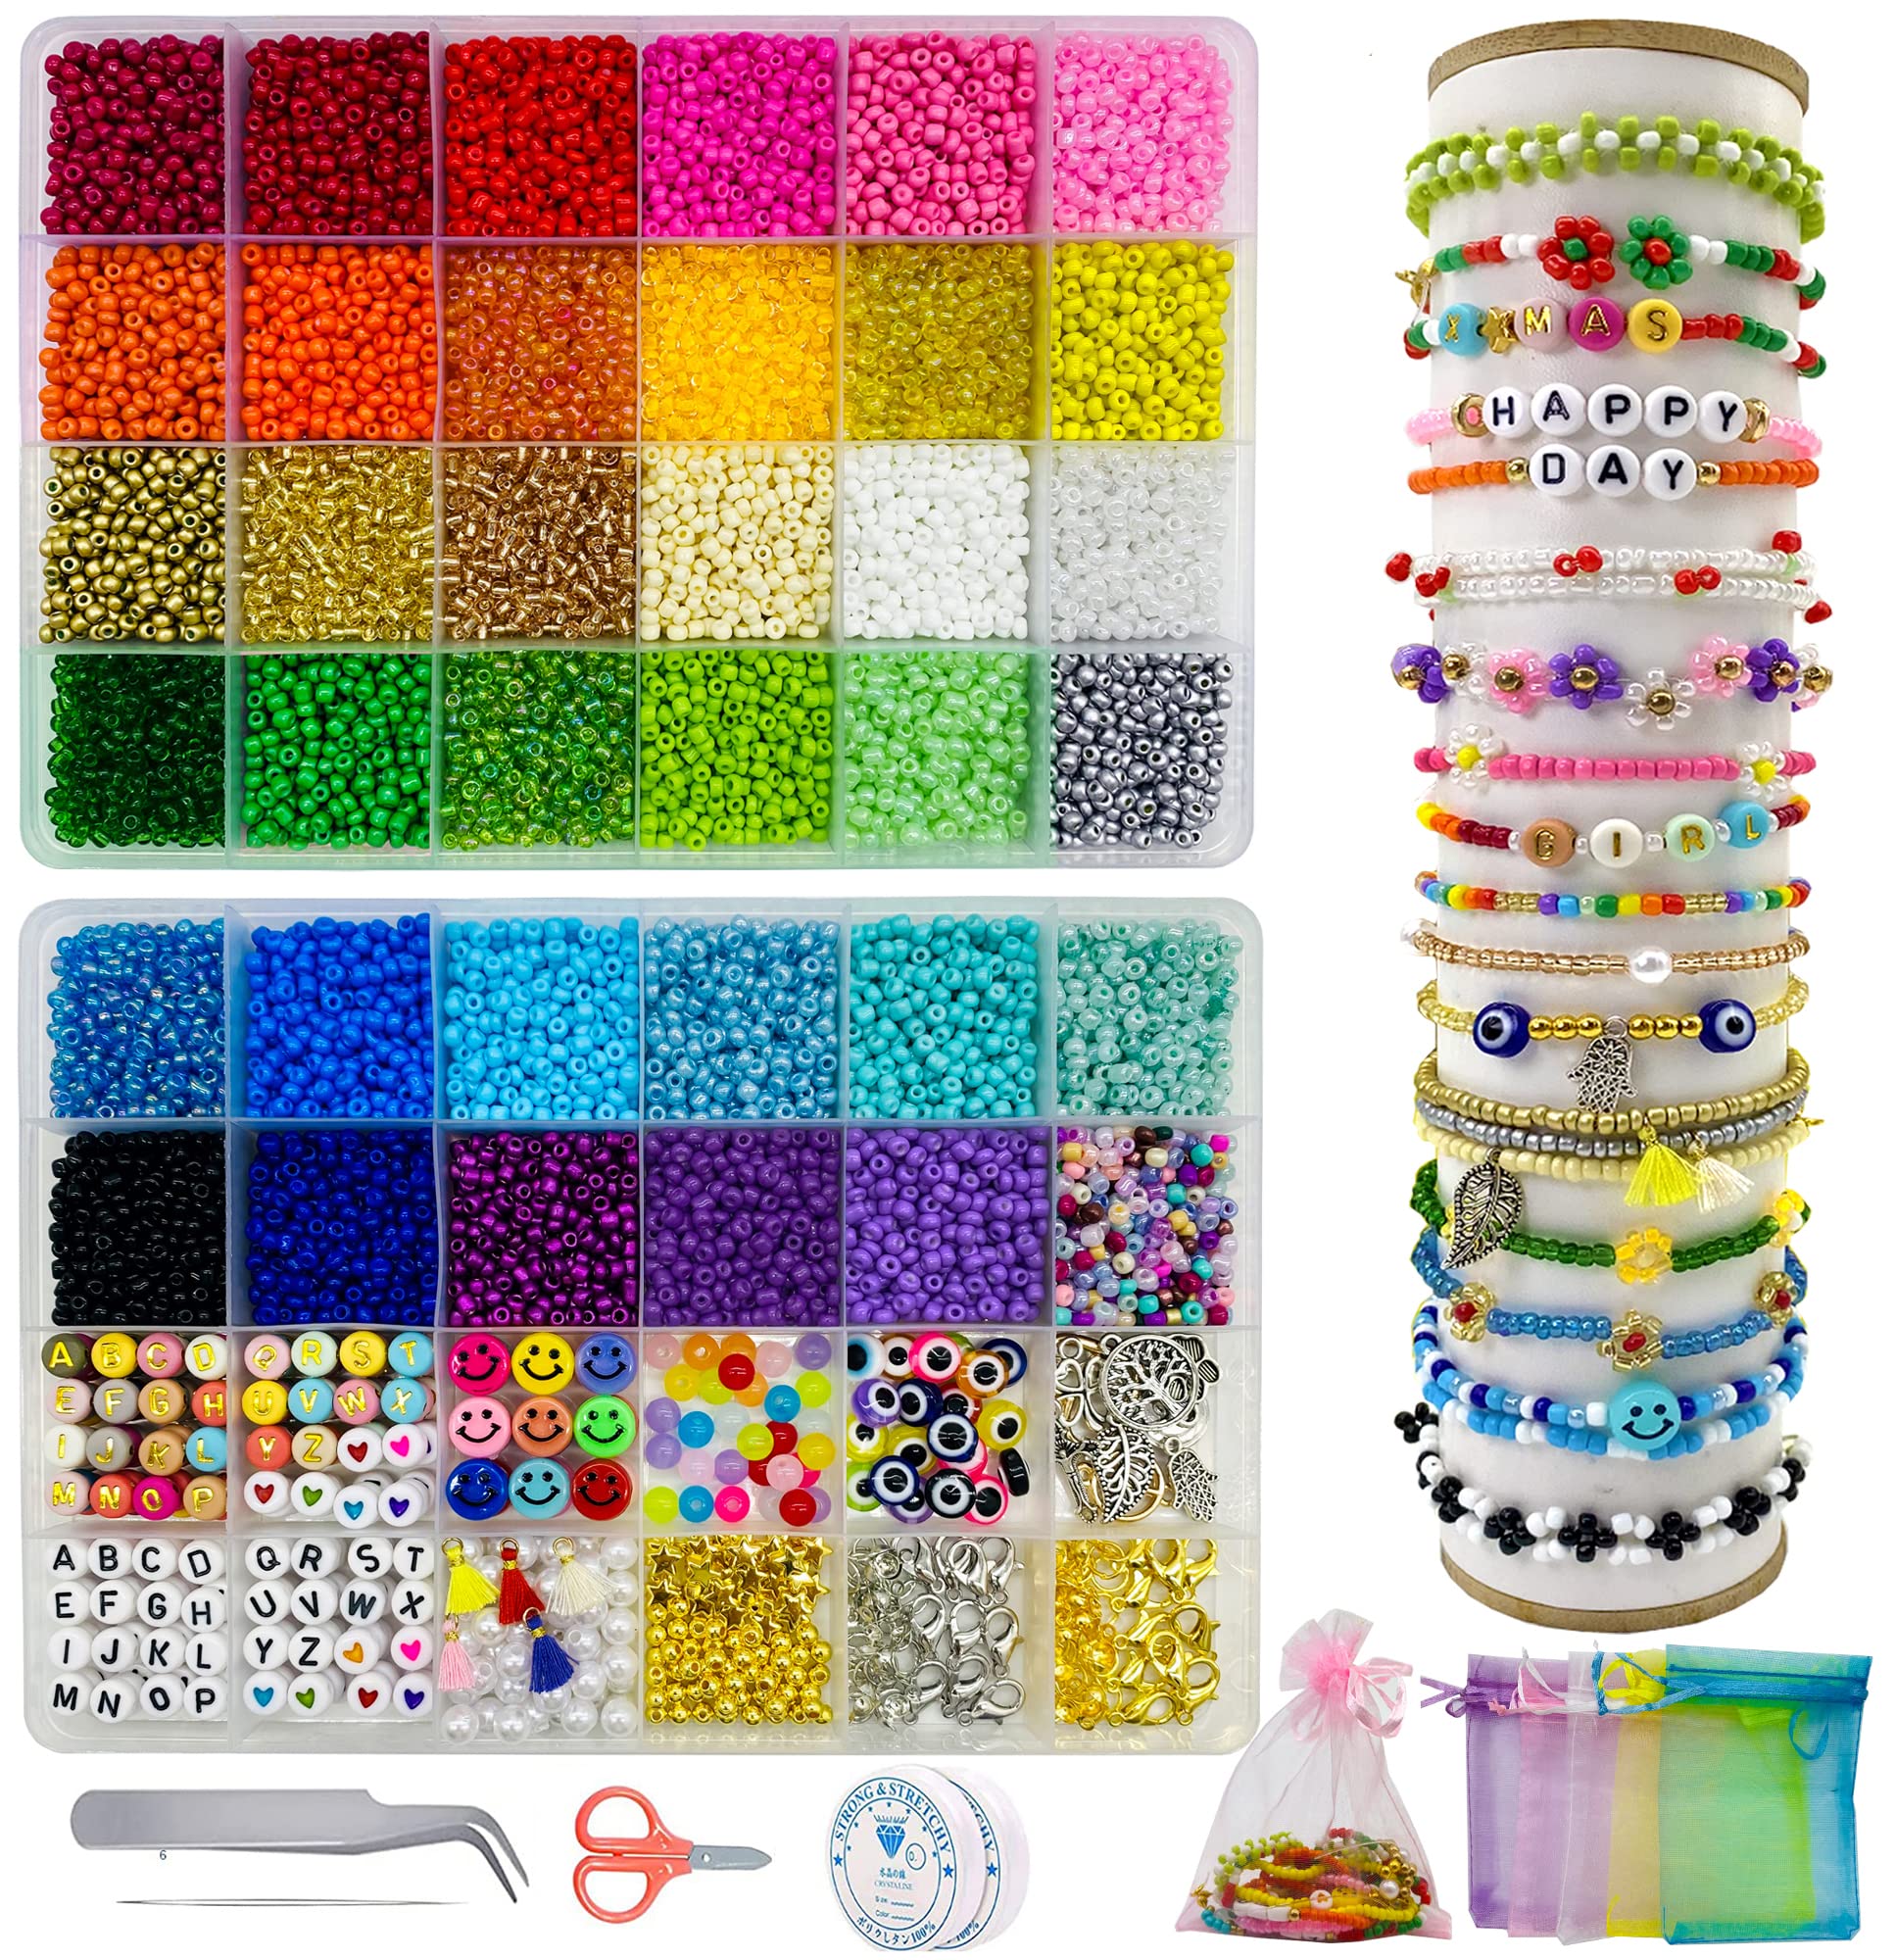 Funtopia 24500+ Pcs Beads for Jewelry Making Kit, Colorful Flat Round  Polymer Clay Beads Glass Seed Beads for Bracelet Making Kit, Necklace Ring  Heishi Beads, DIY Craft Gift for Kids Girls -